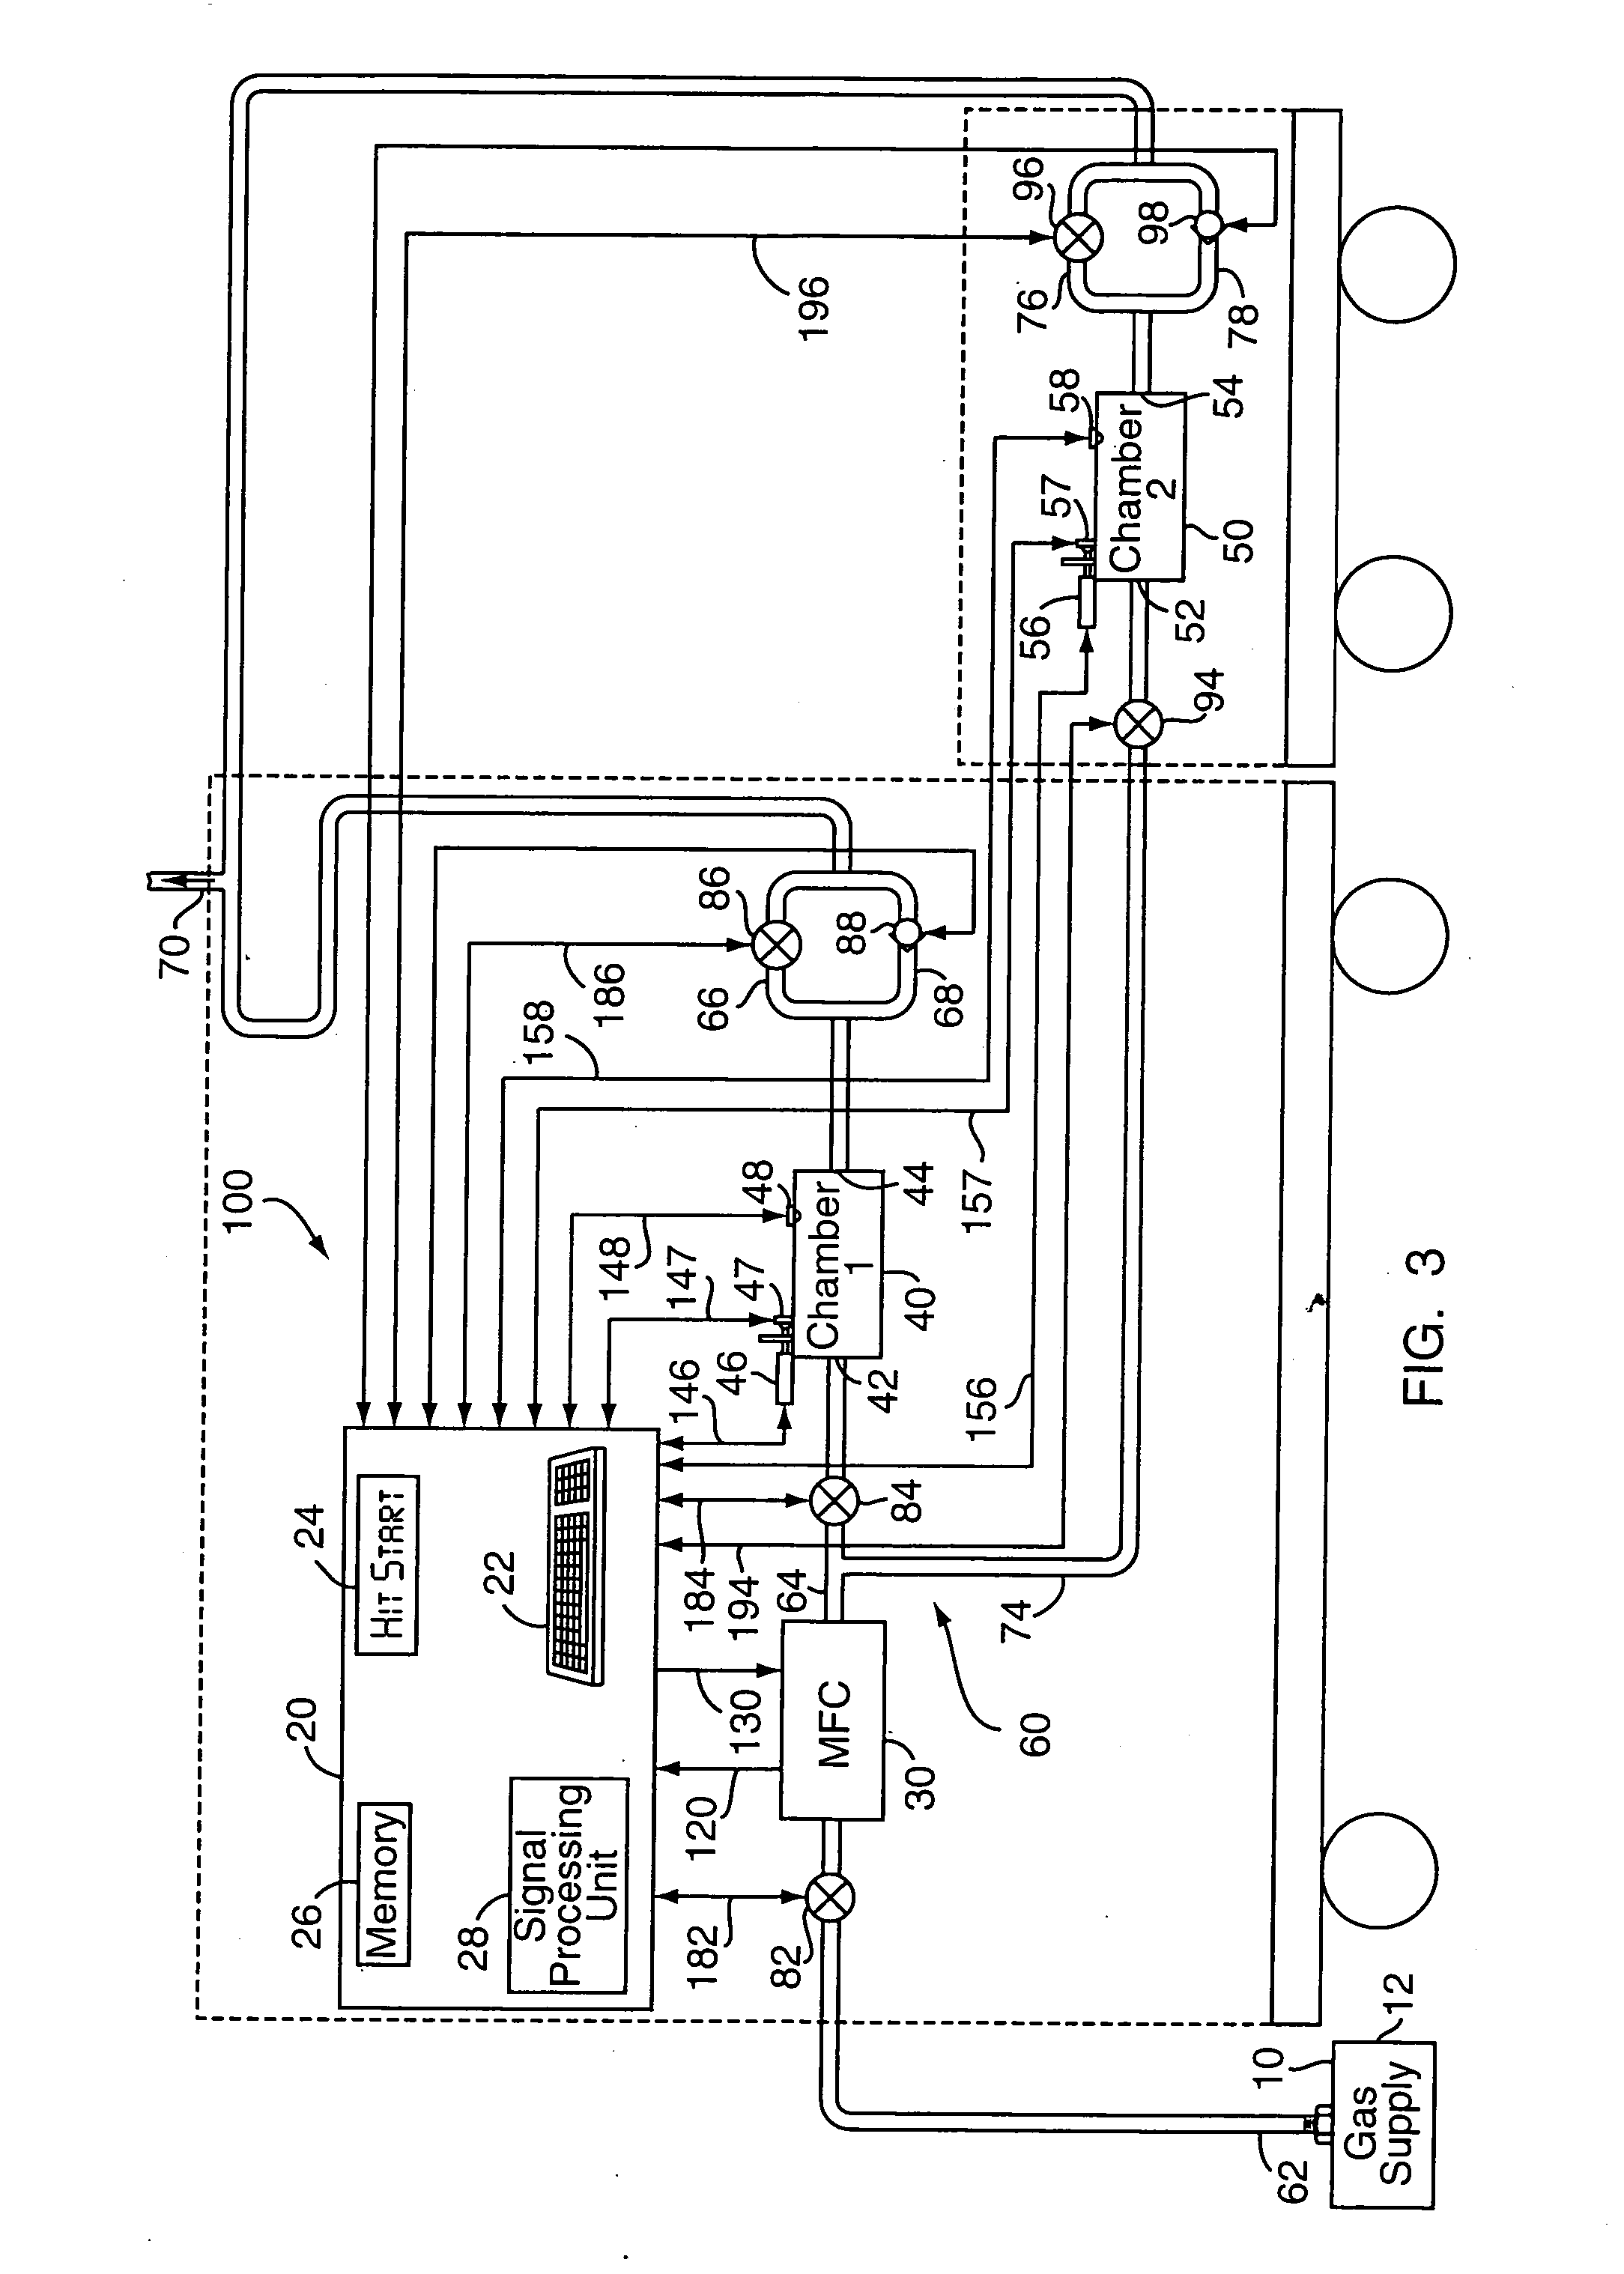 Method and apparatus for the euthanasia of animals